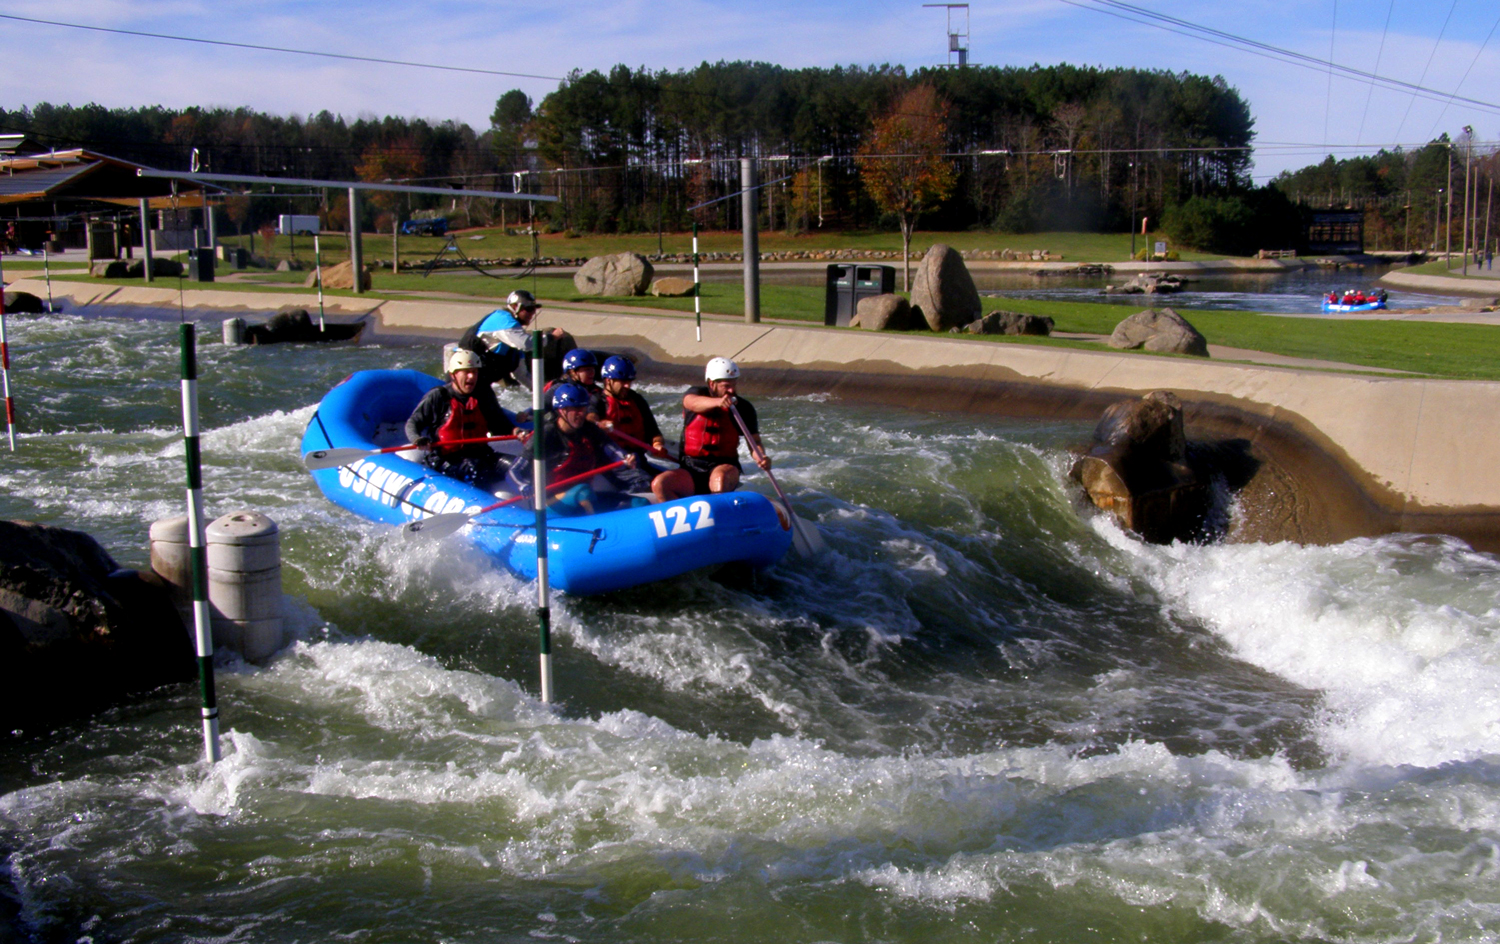 The man-made rivers at the U.S. National Whitewater Center offered participants a variety of rapids. Photograph by Richard Rhinehart.